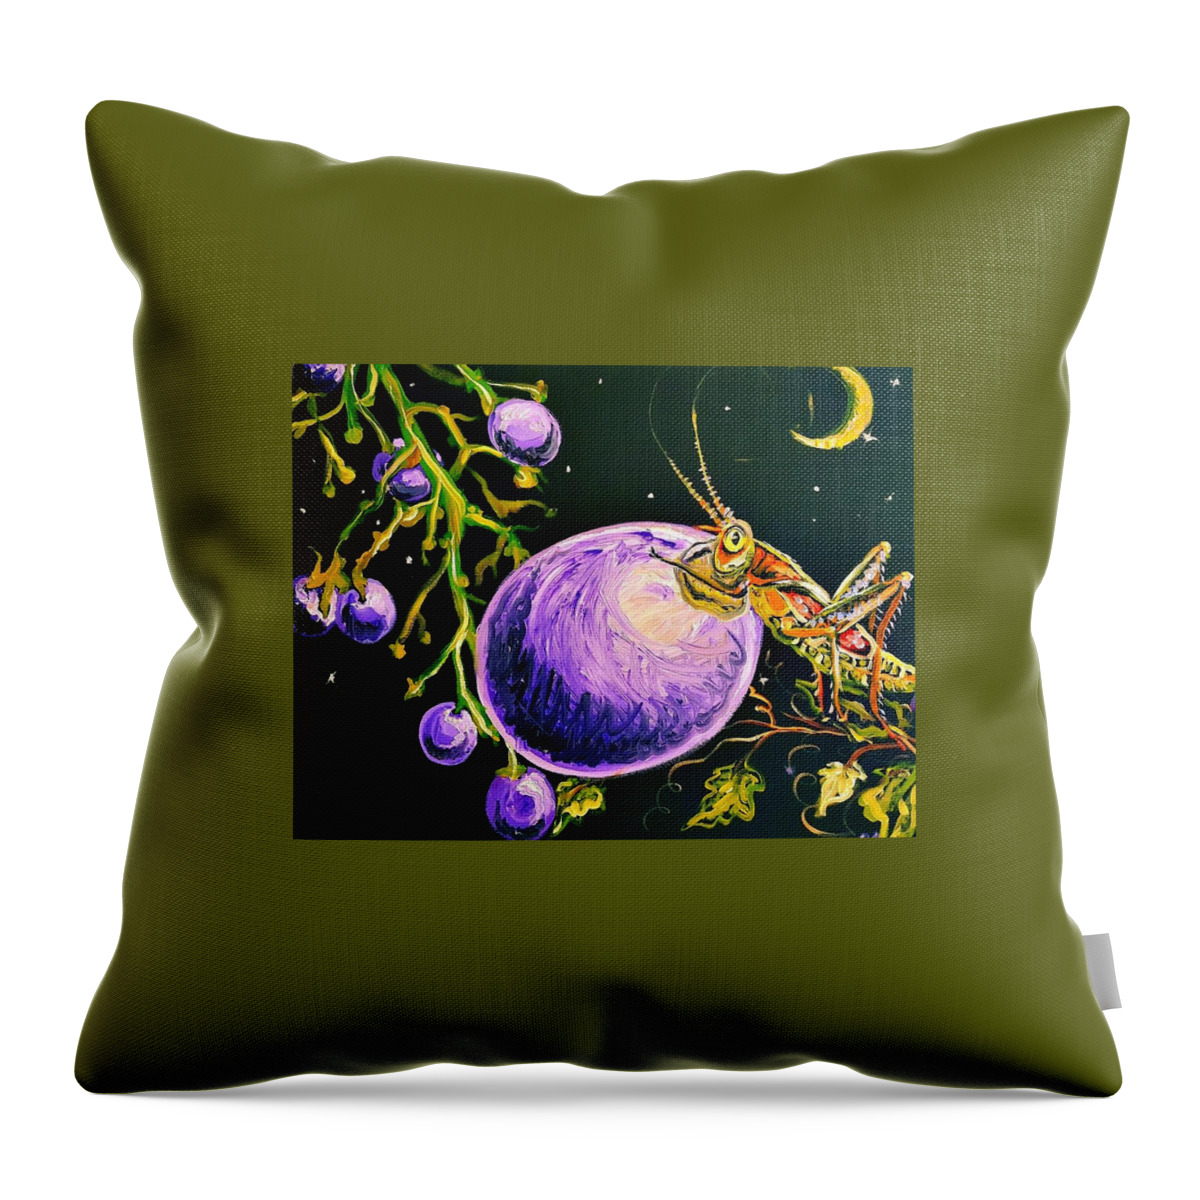 Grape Throw Pillow featuring the painting Mine by Alexandria Weaselwise Busen